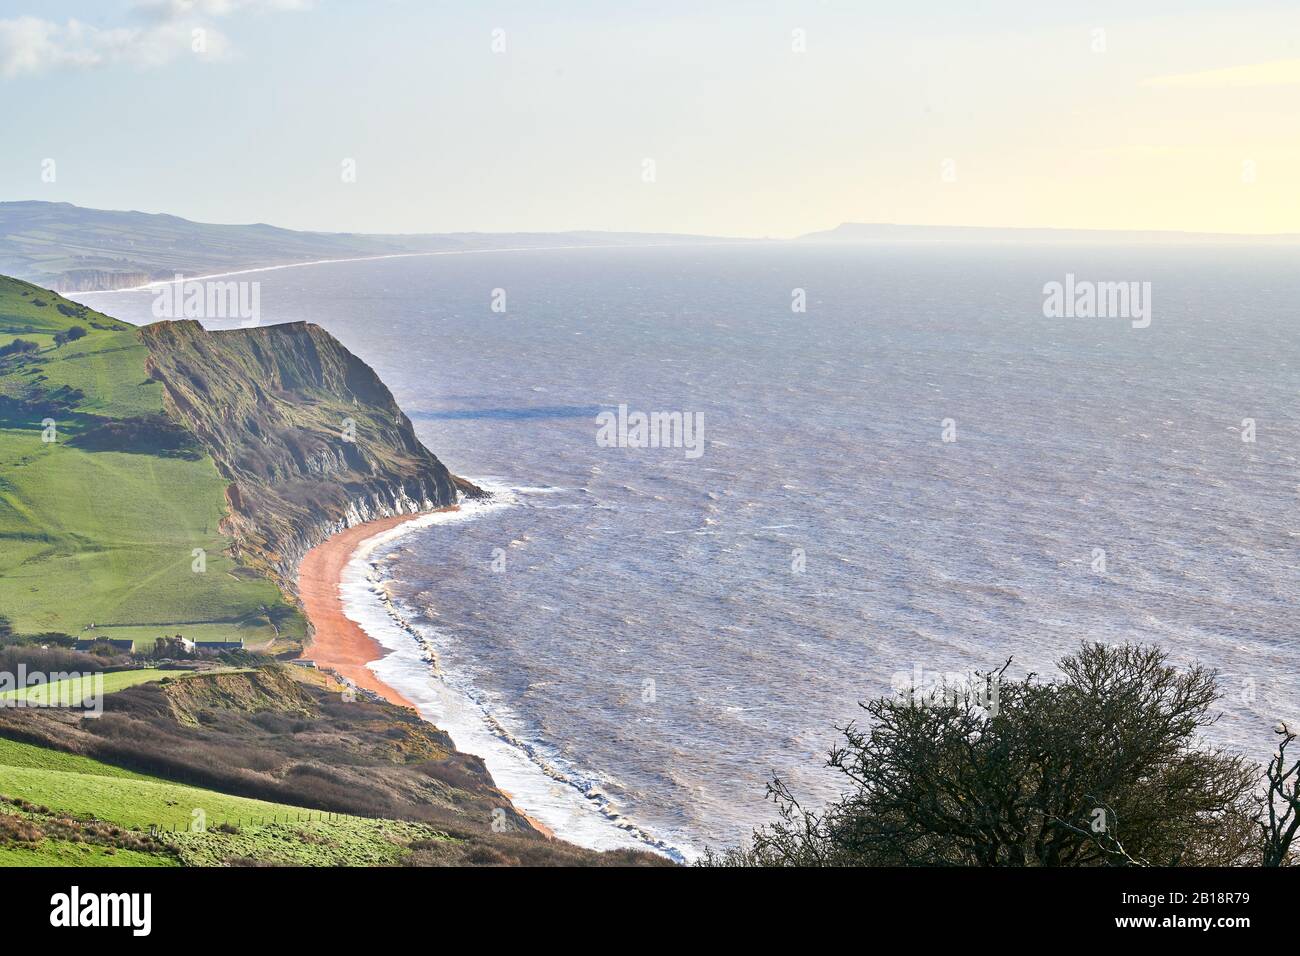 The shingle beach at Seatown, Dorset, by the English Channel with the cliffs of the Jurassic heritage coastline of England, on a sunny winter day. Stock Photo